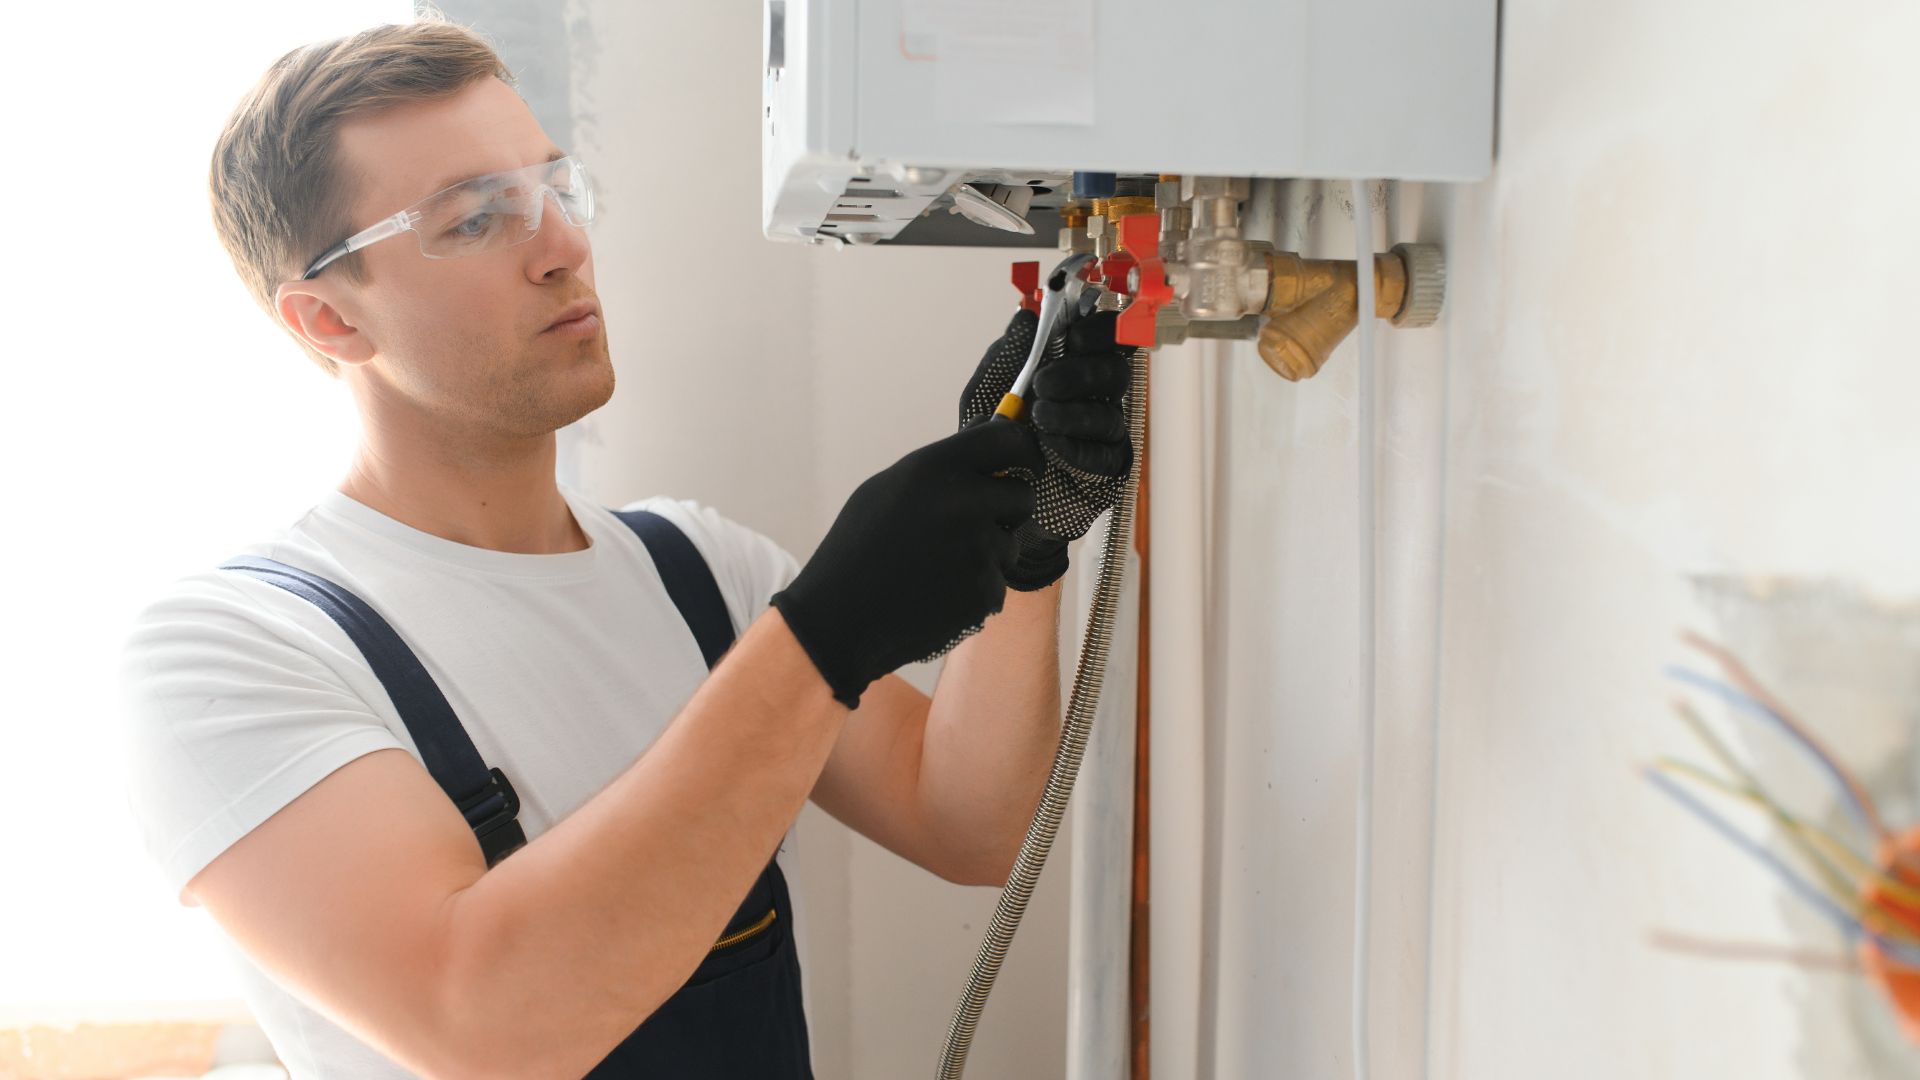 Replacement of boilers by skilled plumbers.